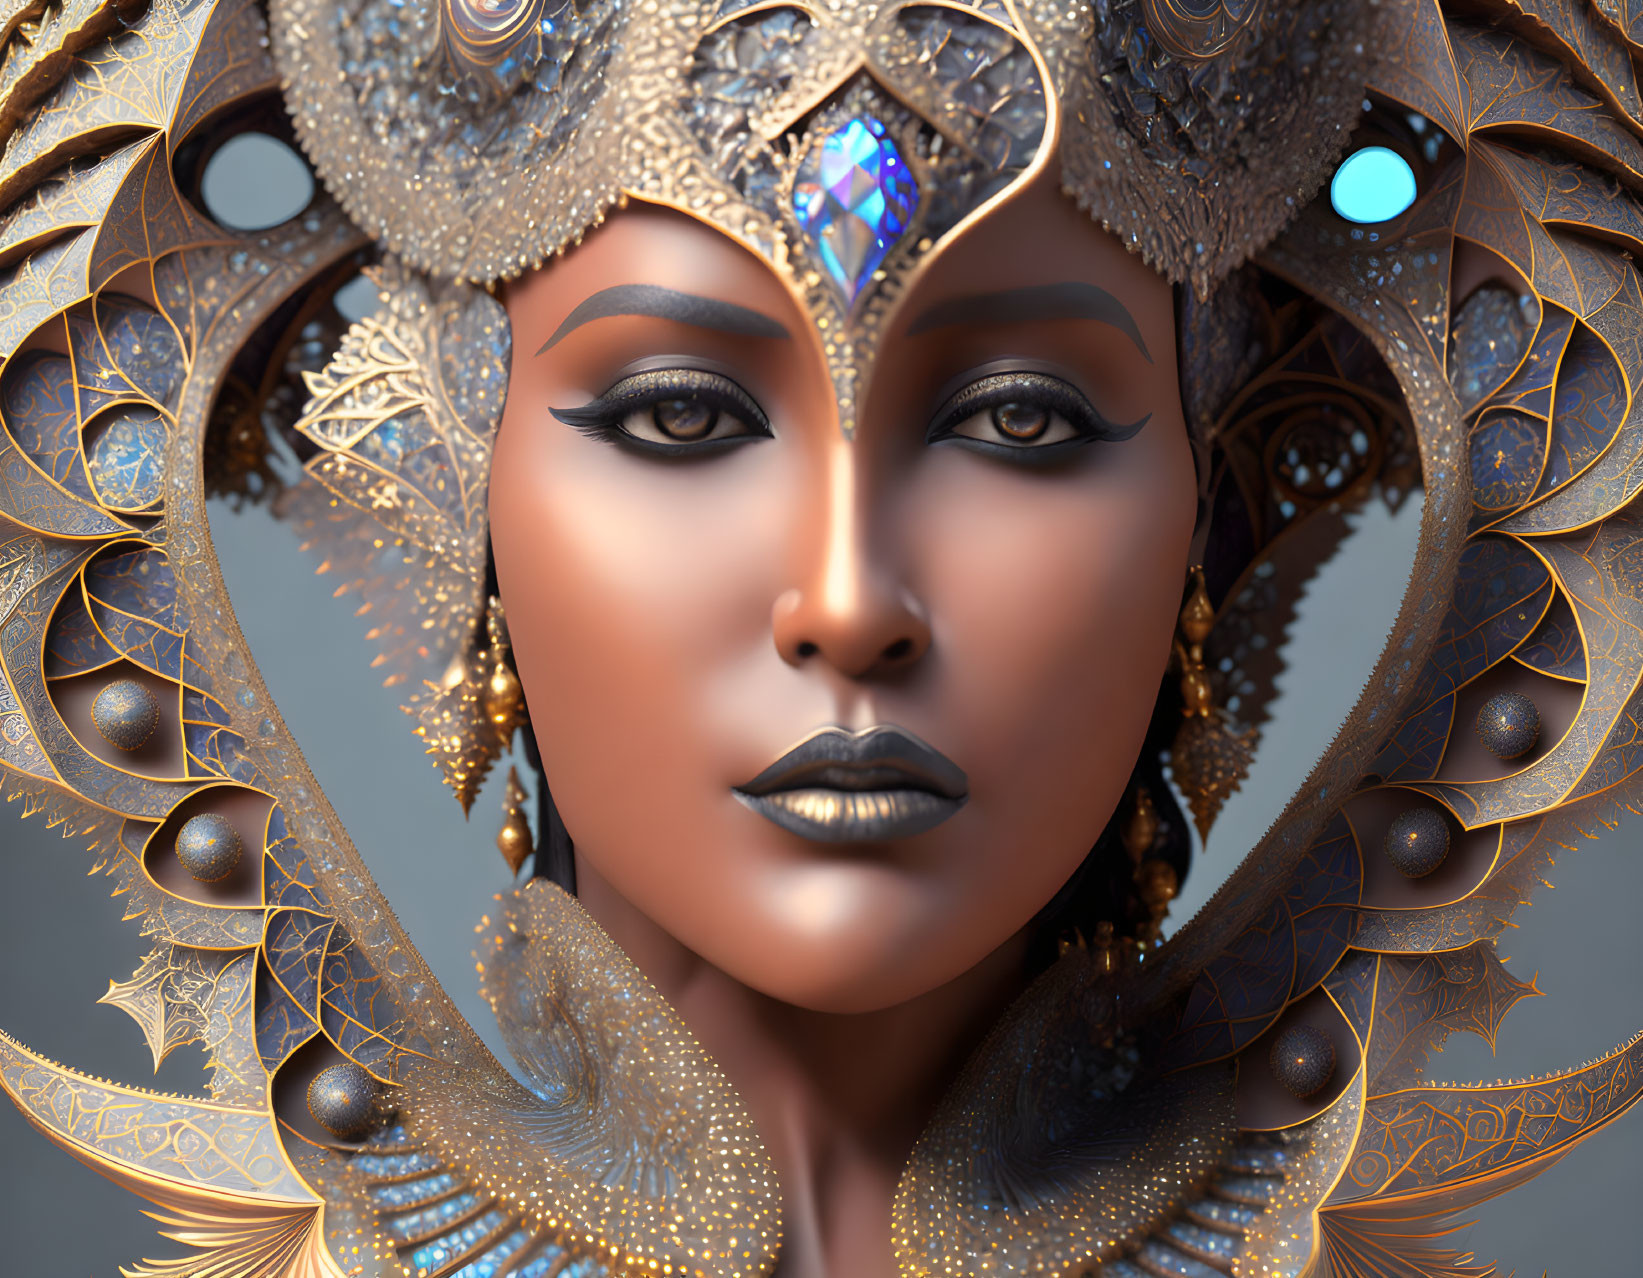 Close-up of 3D-rendered female figure with metallic golden headdress and peacock feathers